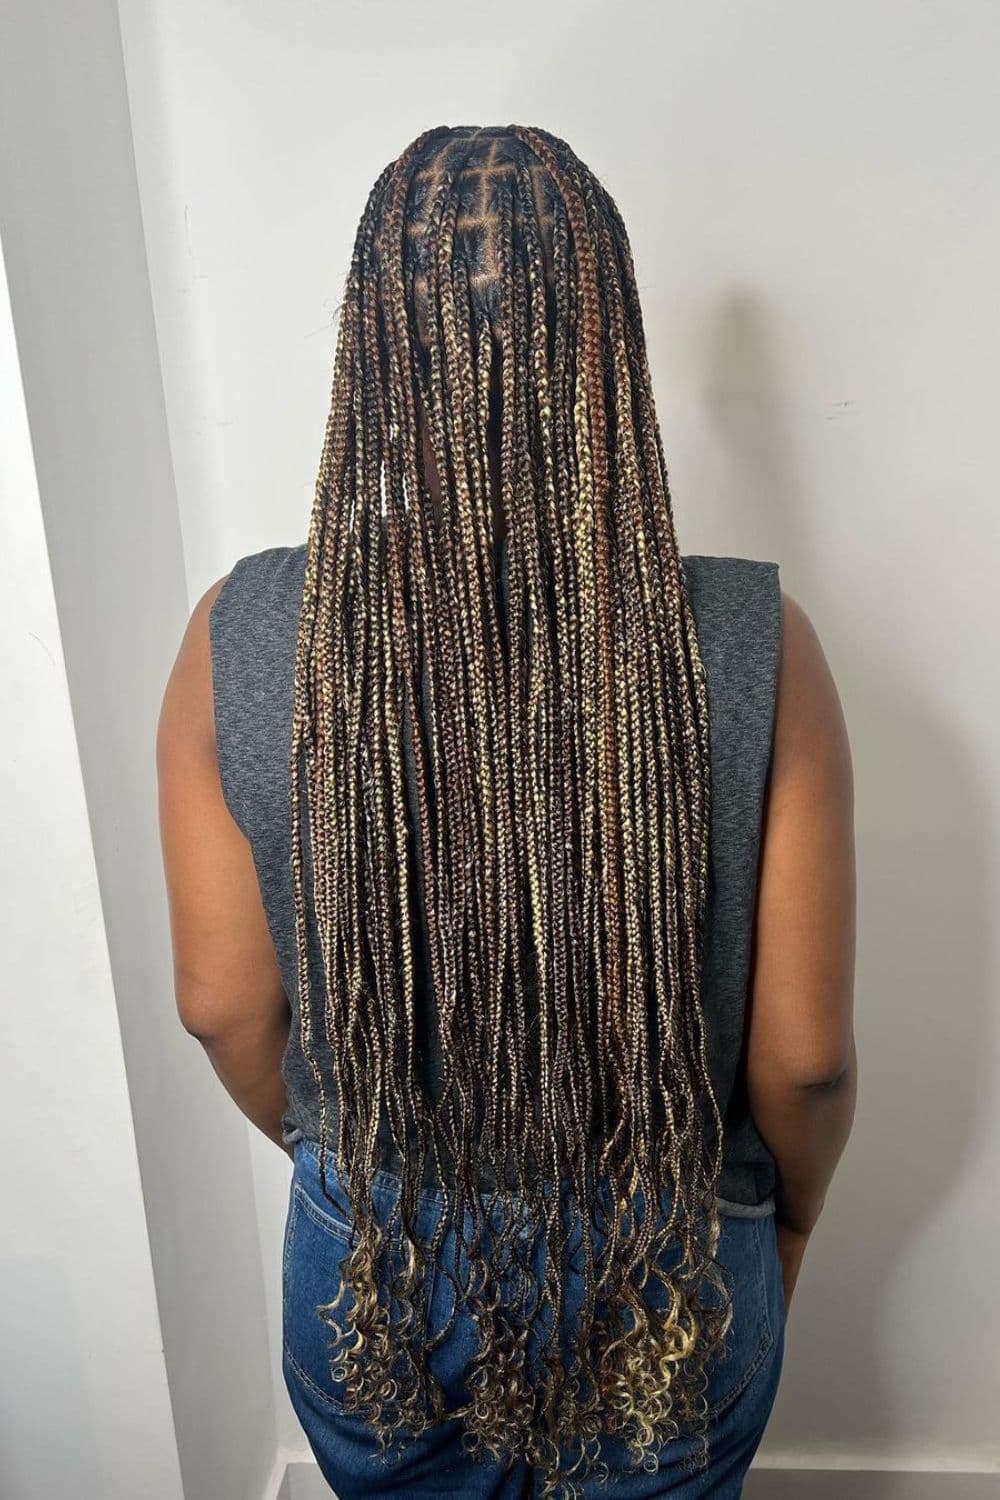 A woman with long knotless braids with highlights.